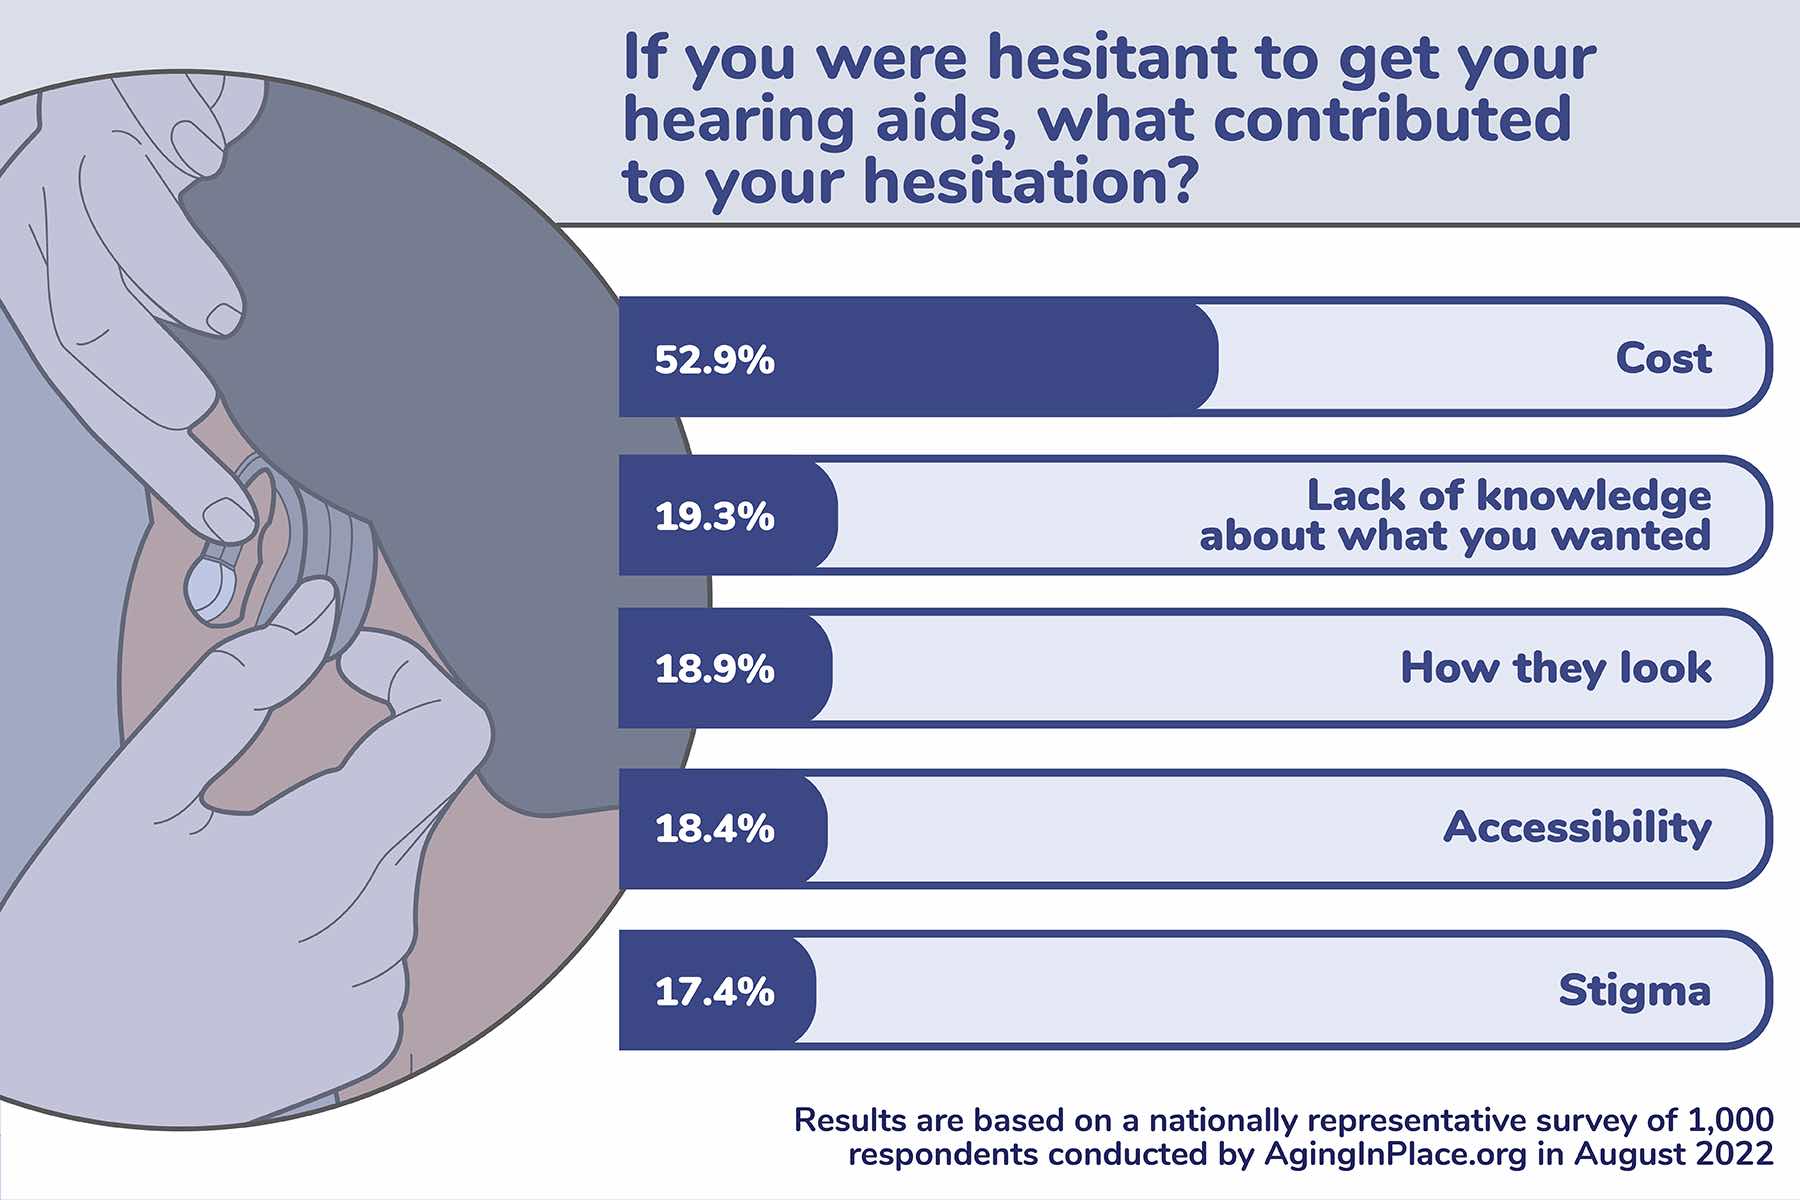 Hesitation about getting the hearing aid infographic survey question conducted by AgingInPlace.org